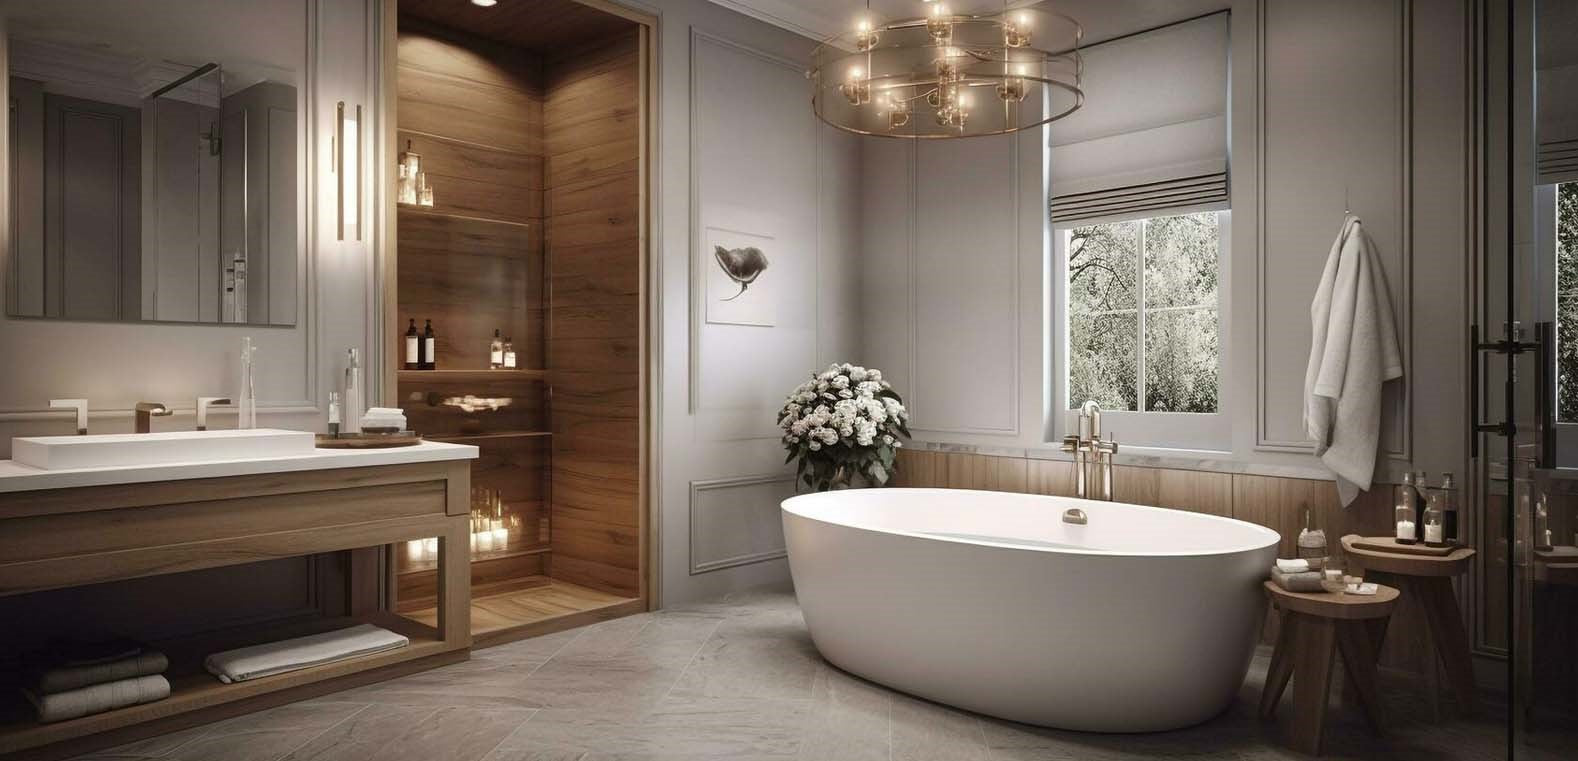 Things to Consider Before Purchasing Luxury Bathroom Fixtures Online